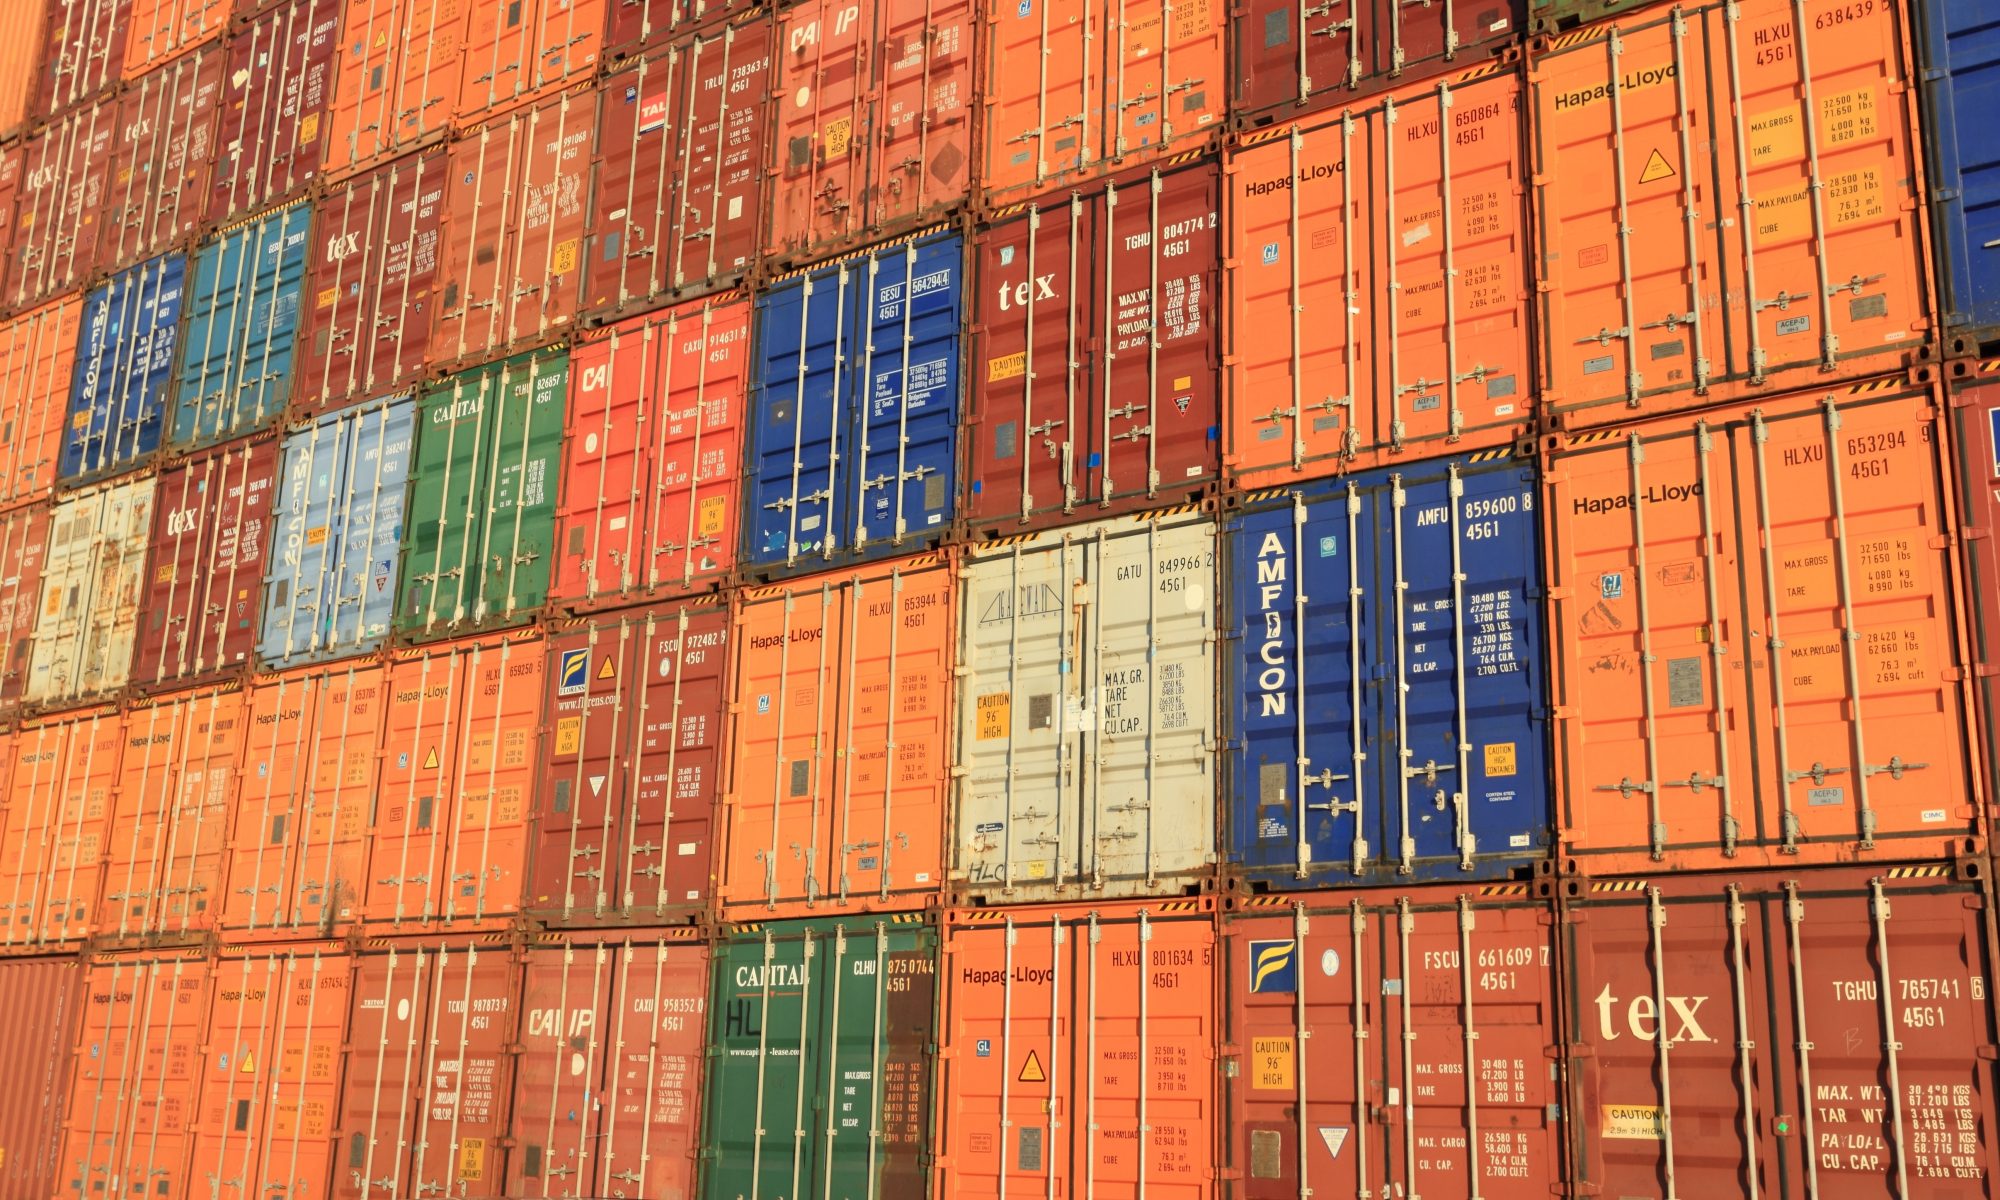 Containers are backing up in ports, causing major supply chain disruptions.